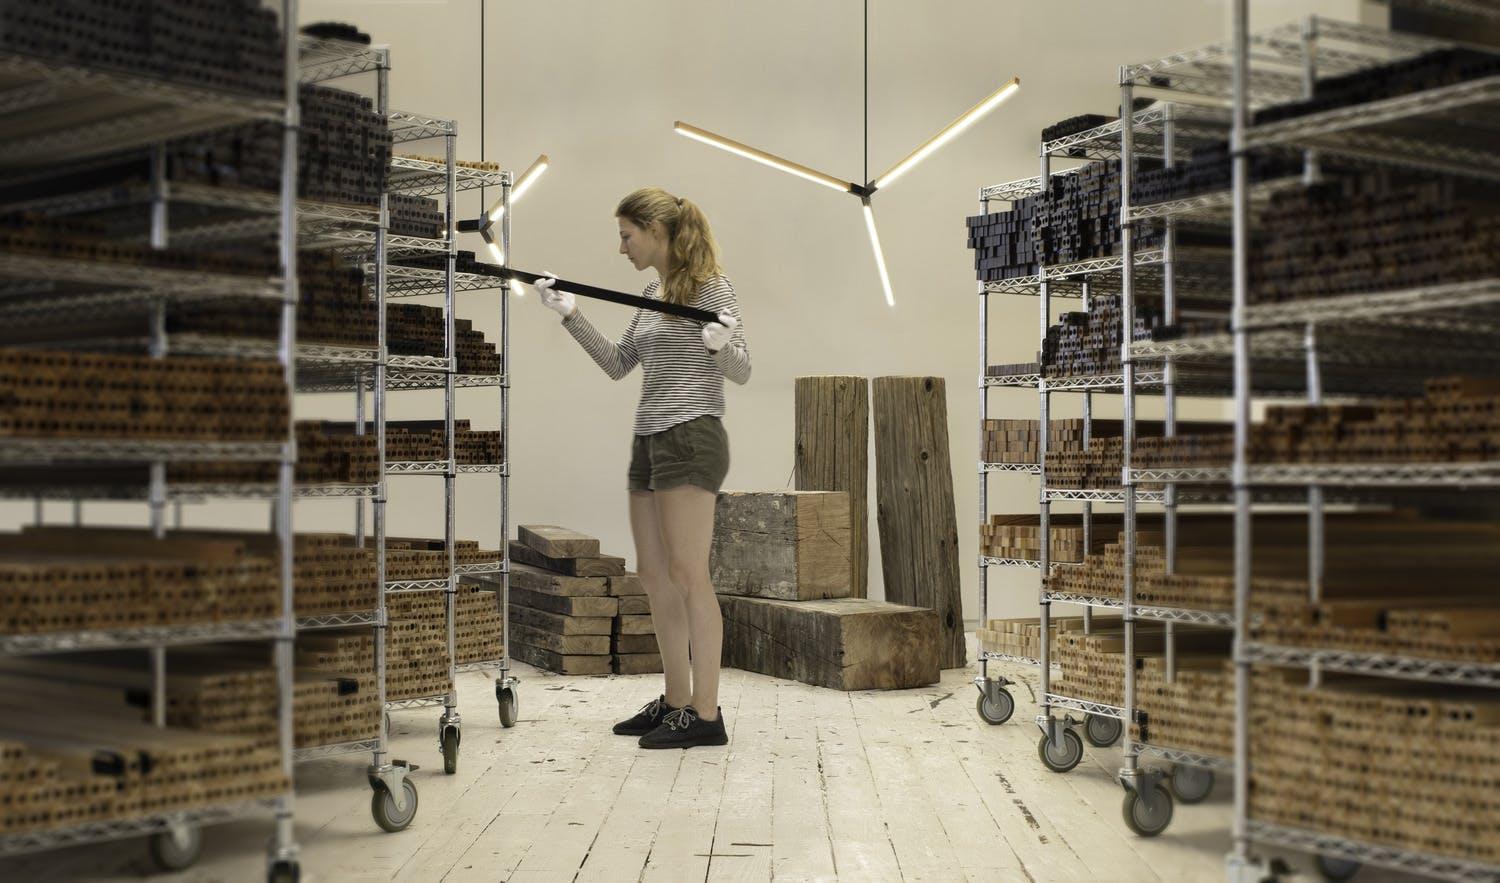 Stickbulb, based in Brooklyn, NY, stockpiles reclaimed timber from various sources, including New York’s iconic water tanks, to construct its LED light fixtures. Stickbulb